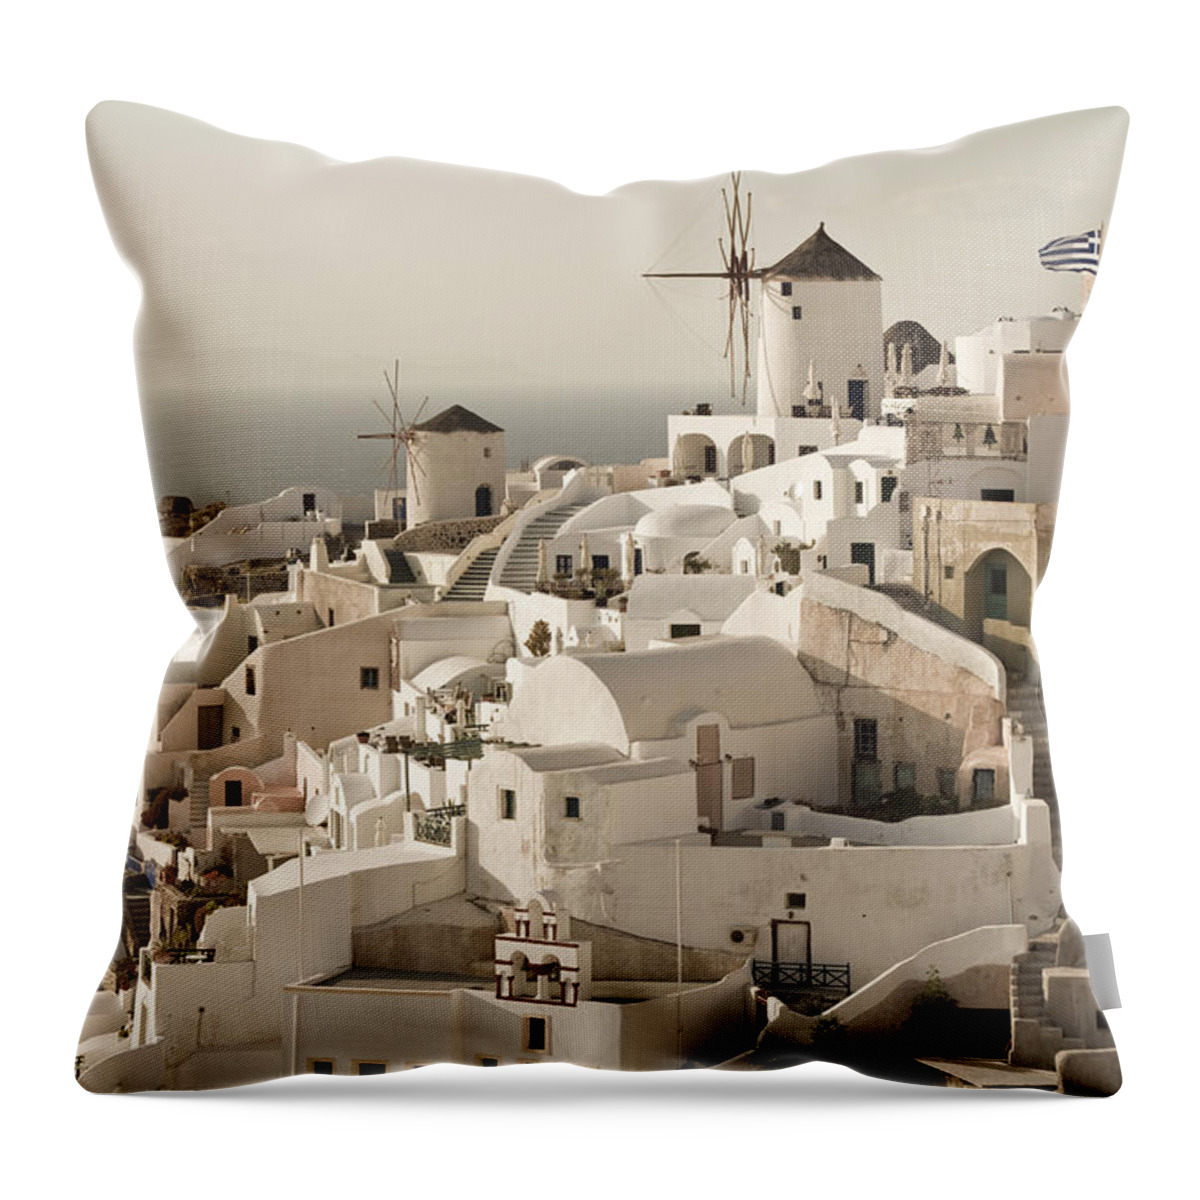 Greek Culture Throw Pillow featuring the photograph Santorini, Greece by Szaffy